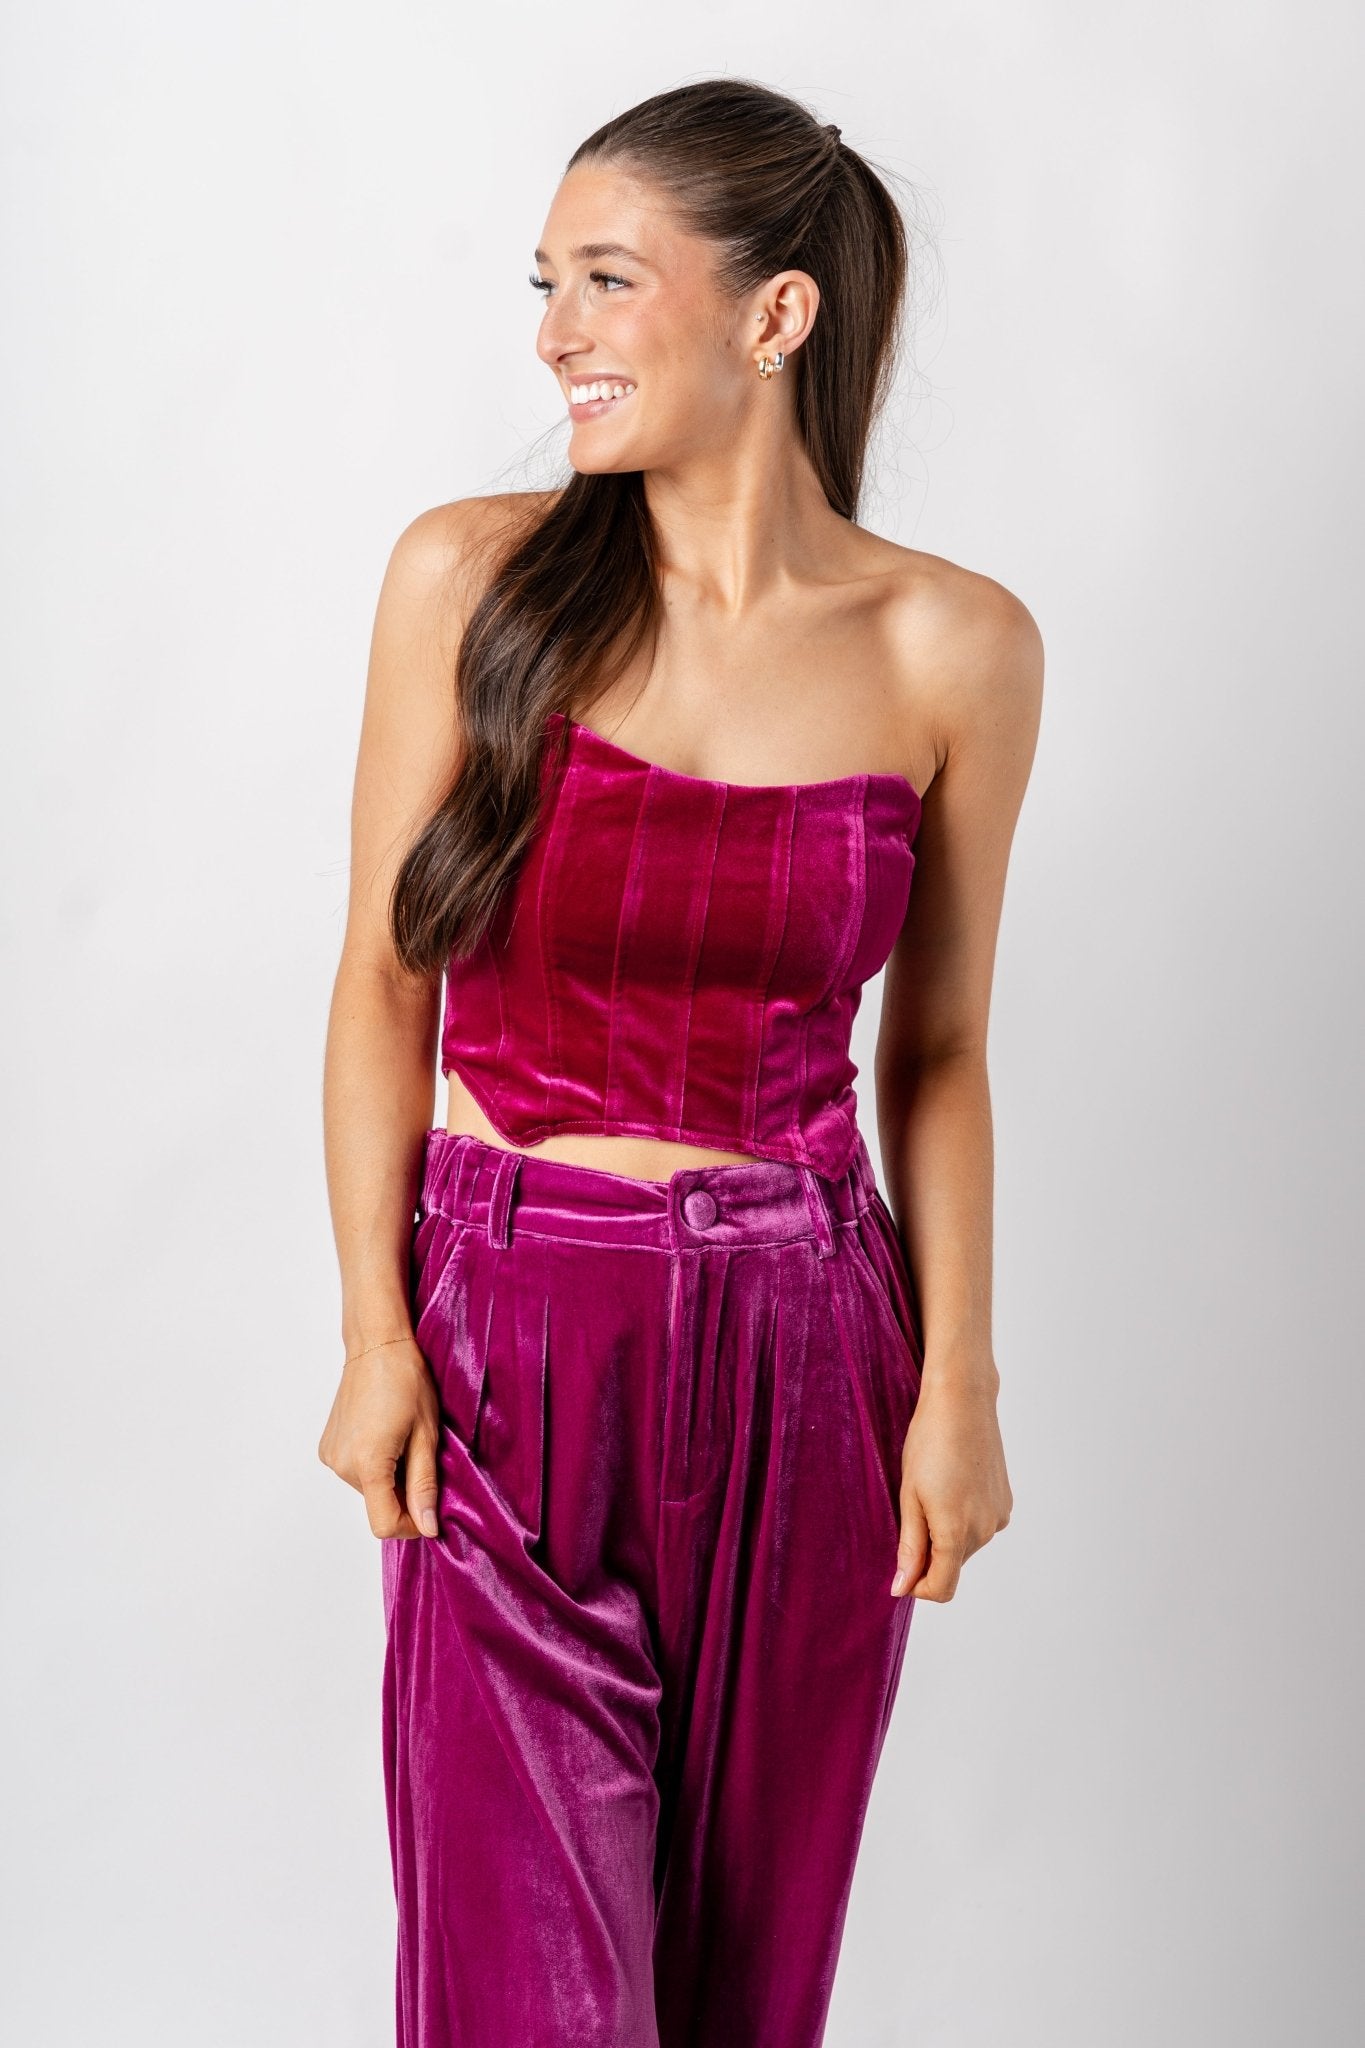 Velvet bustier top plum - Trendy New Year's Eve Outfits at Lush Fashion Lounge Boutique in Oklahoma City